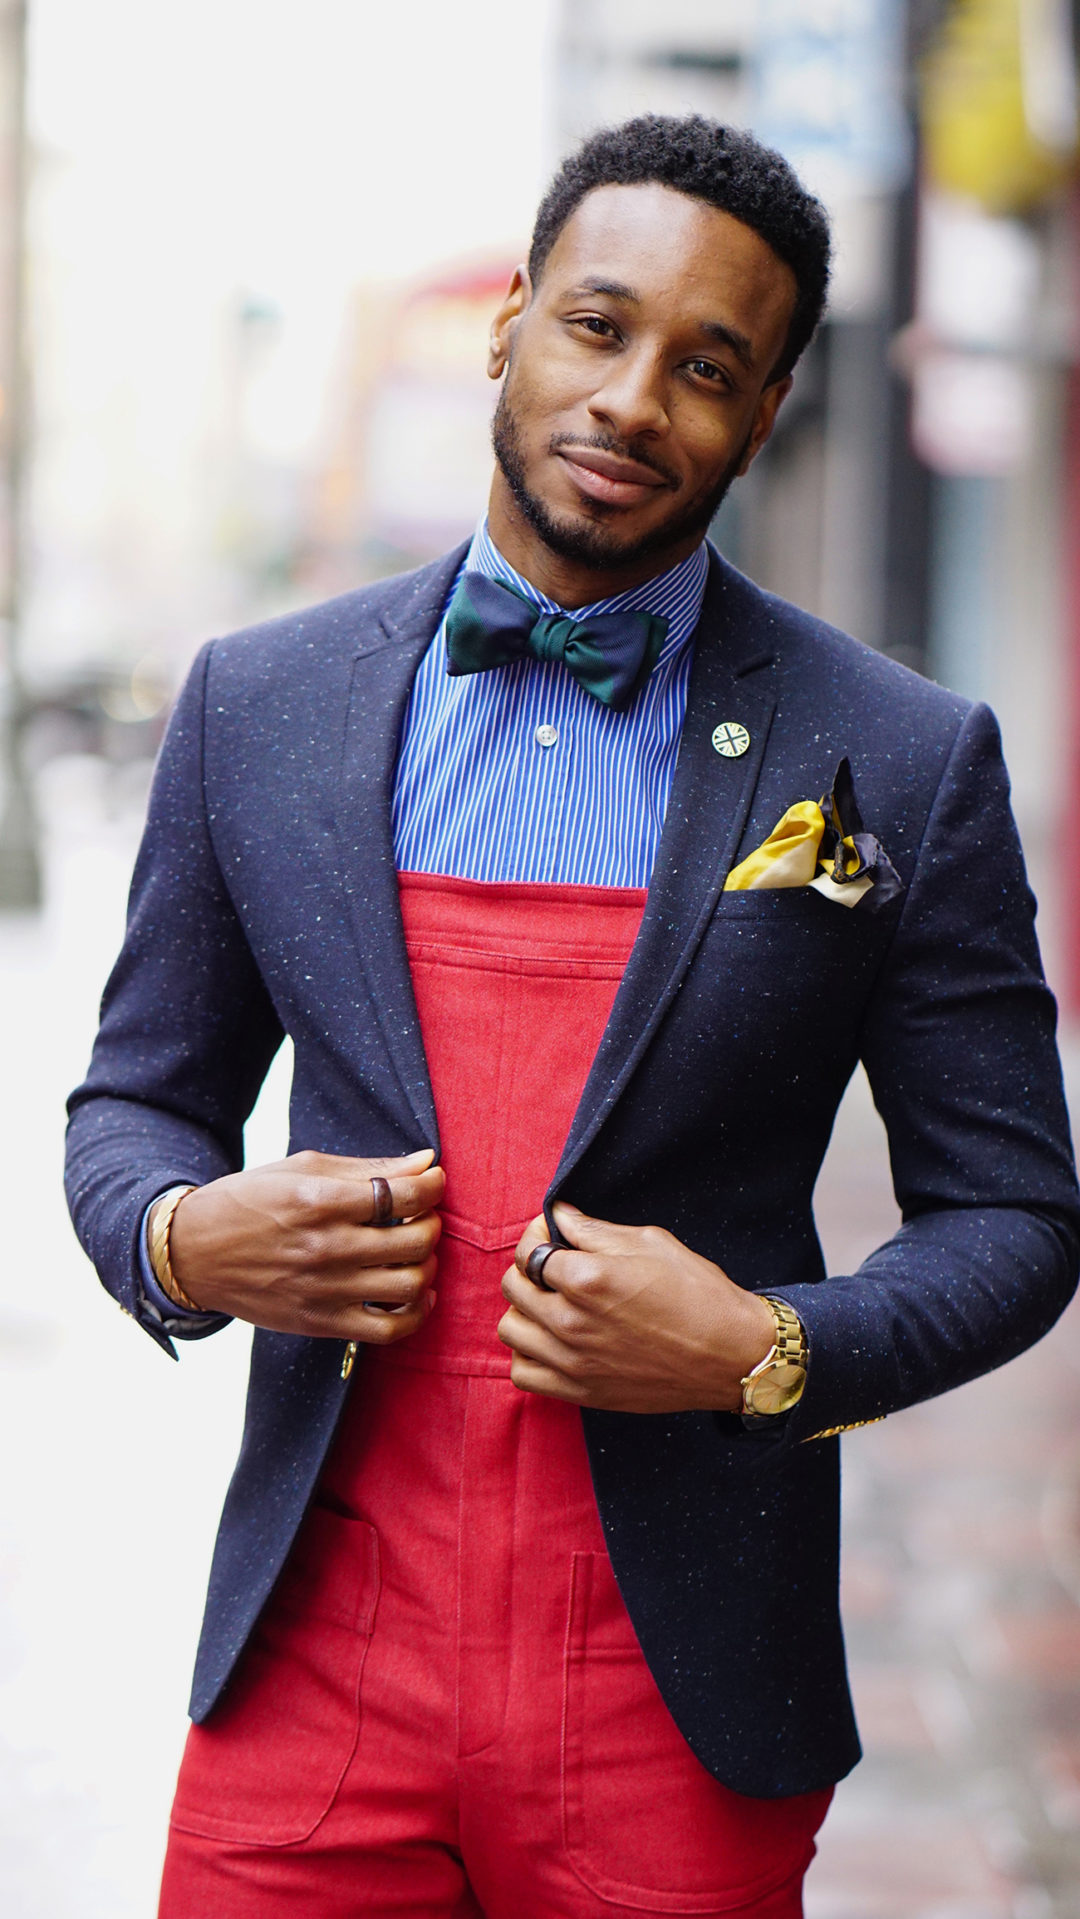 DIY: FIRE RED OVERALLS + SPORTS COAT + BOW TIE – Norris Danta Ford